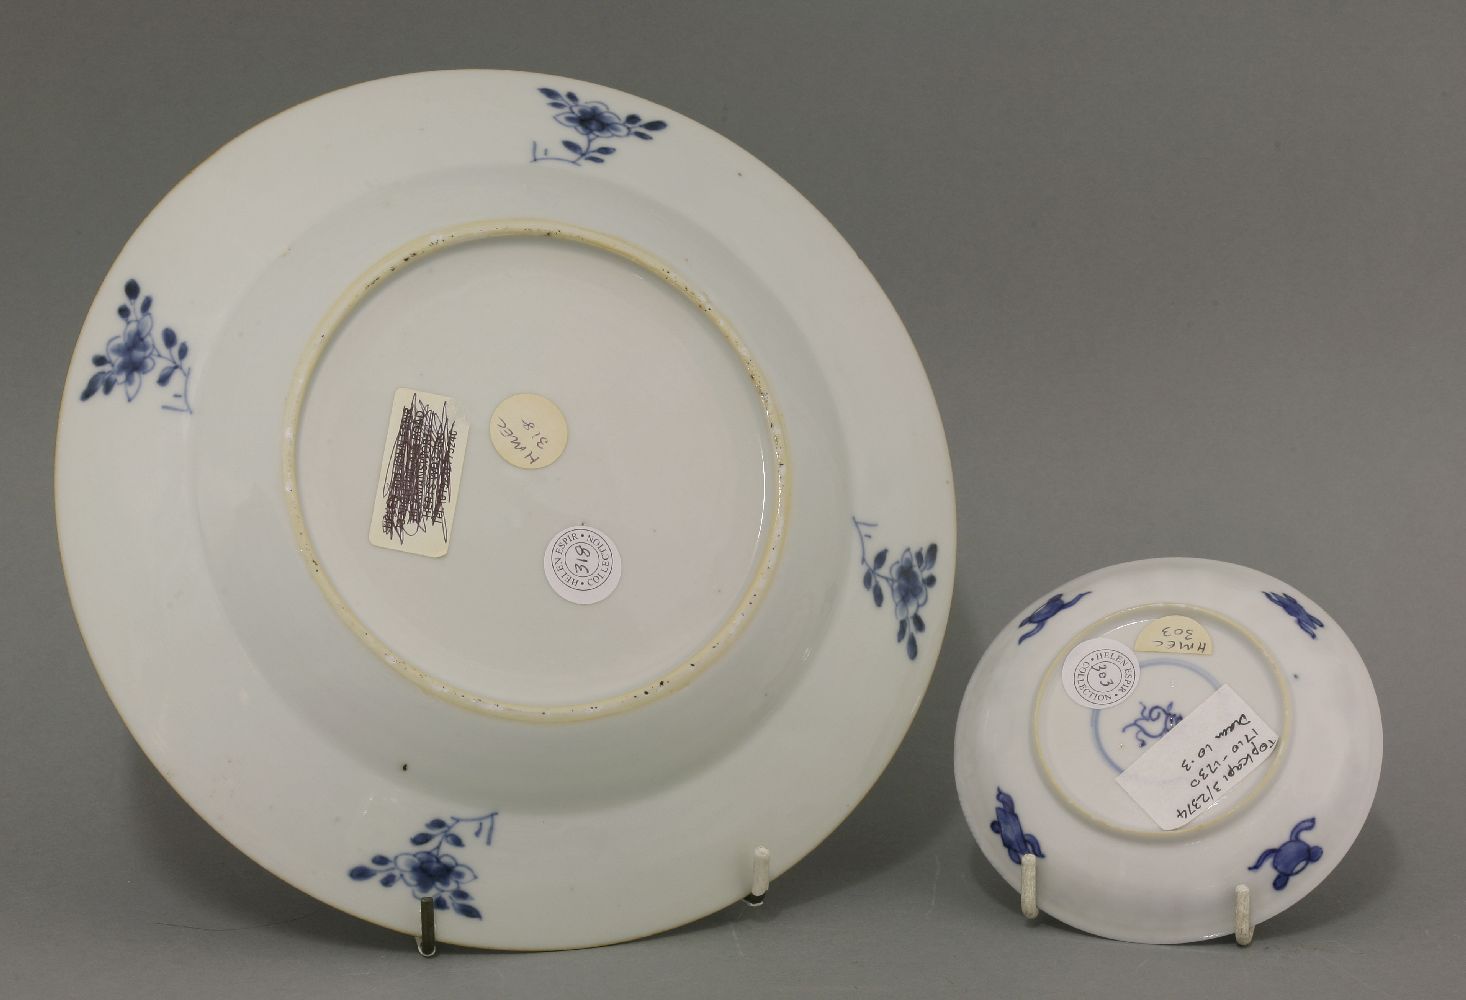 A rare blue and white Plate, mid 18th century, painted with two birds flanking a pagoda below - Image 2 of 2